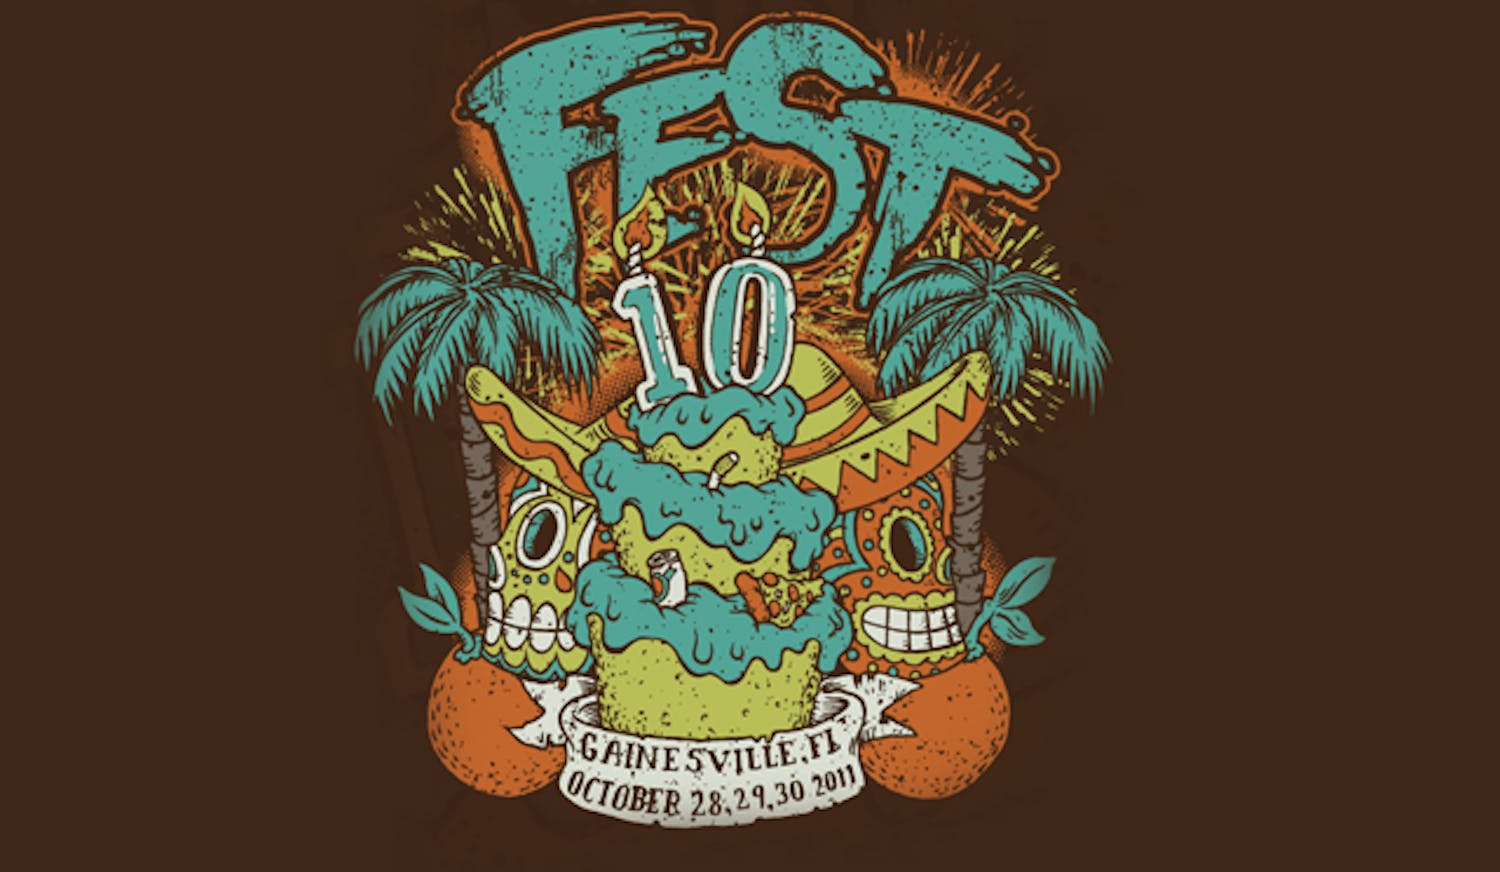 Fest 10, the punk rock music festival, features more than 200 bands and will invade Gainesville beginning Friday.